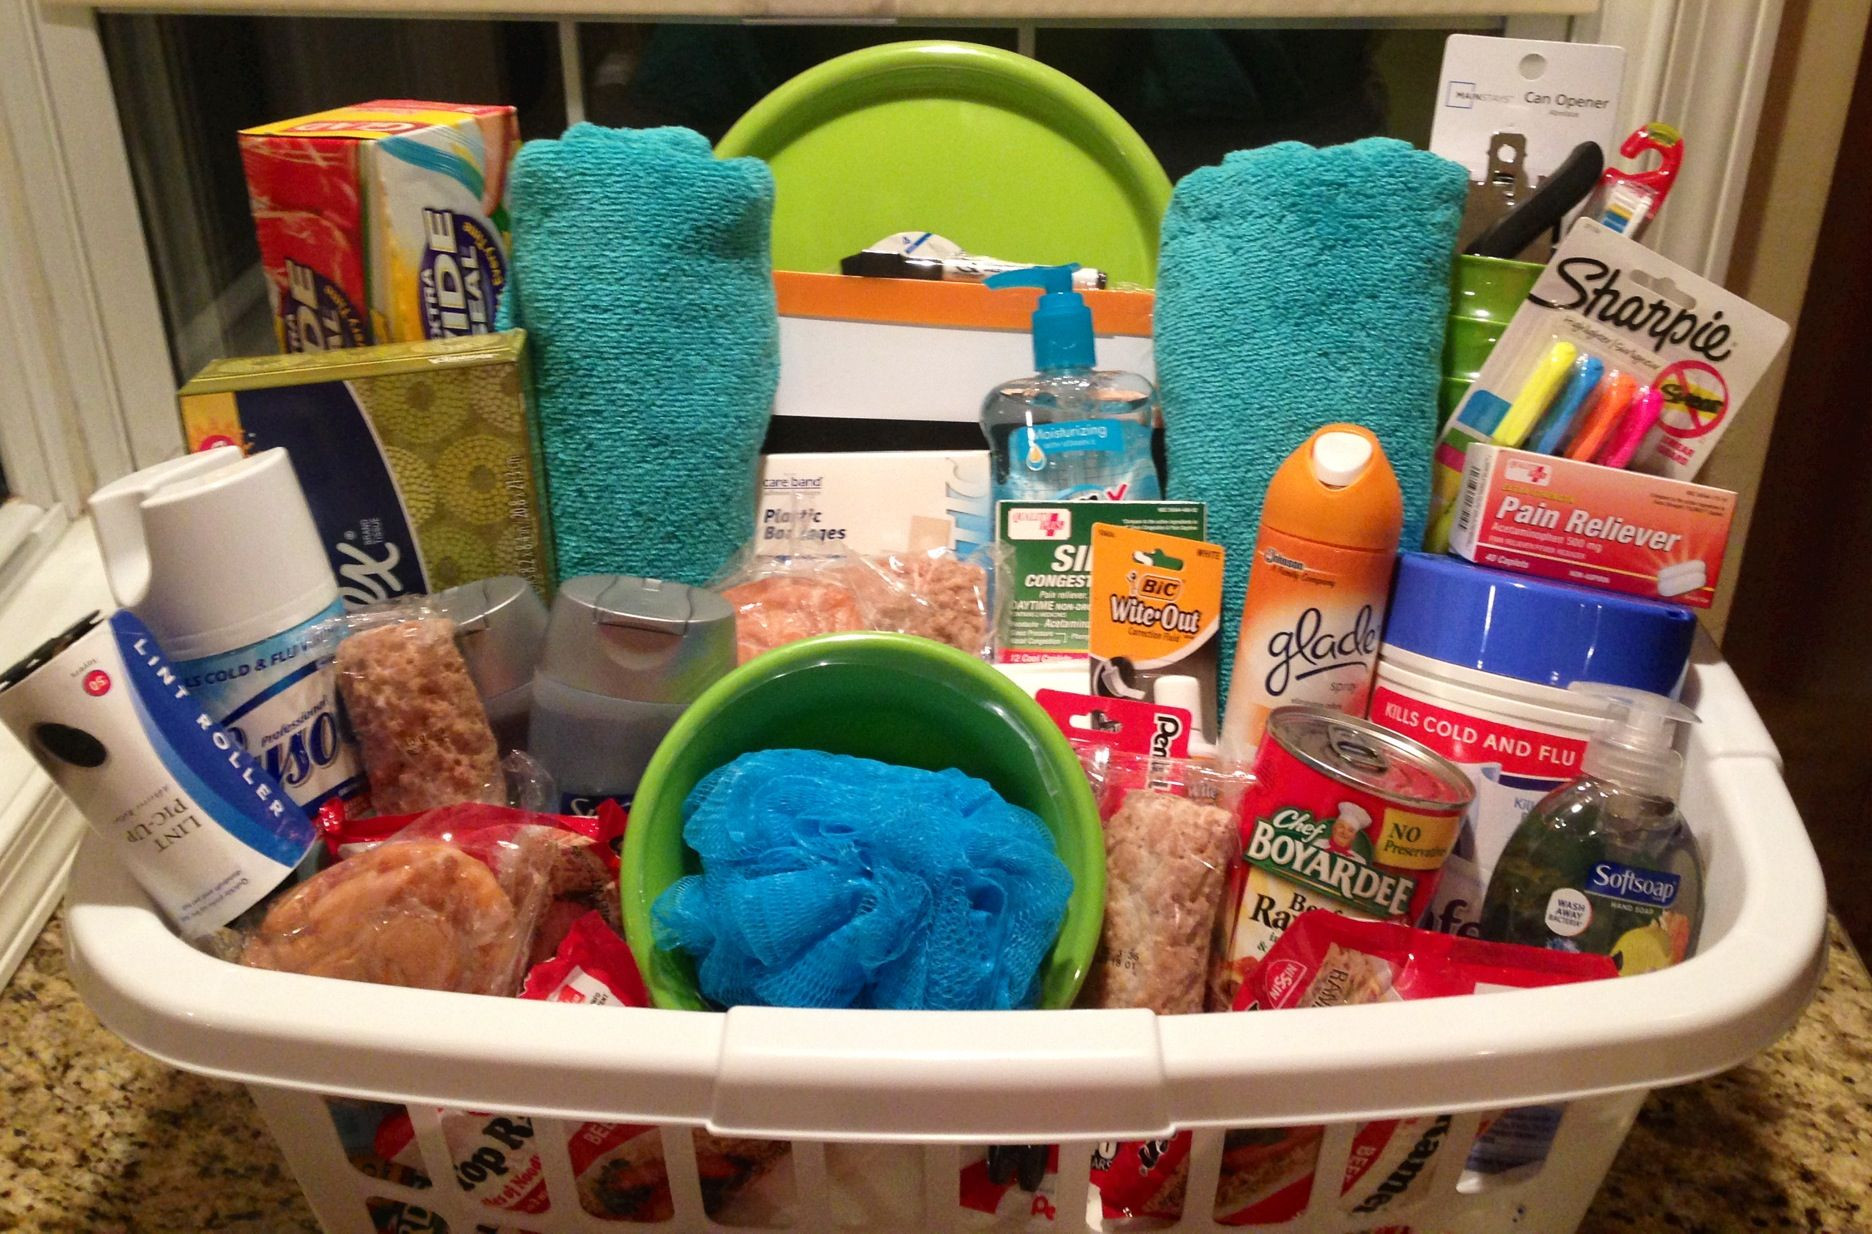 Off To College Gift Basket Ideas
 An " f to College" Basket I put to her for my step